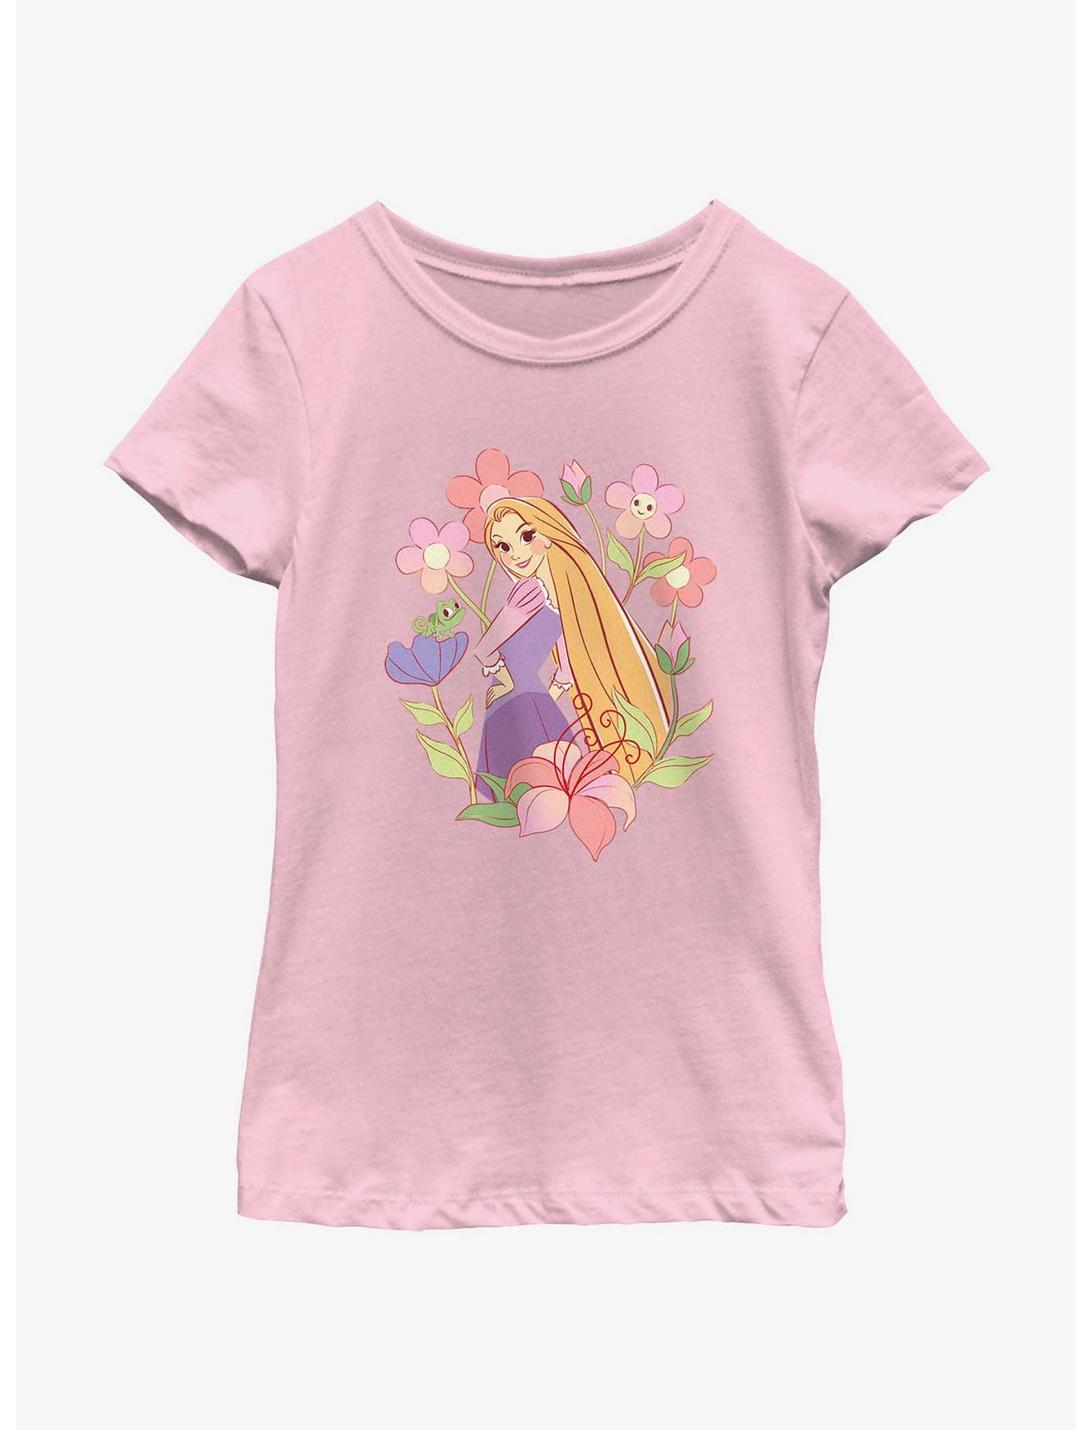 Disney Princesses Rapunzel And Pascal With Flowers Youth Girls T-Shirt, PINK, hi-res